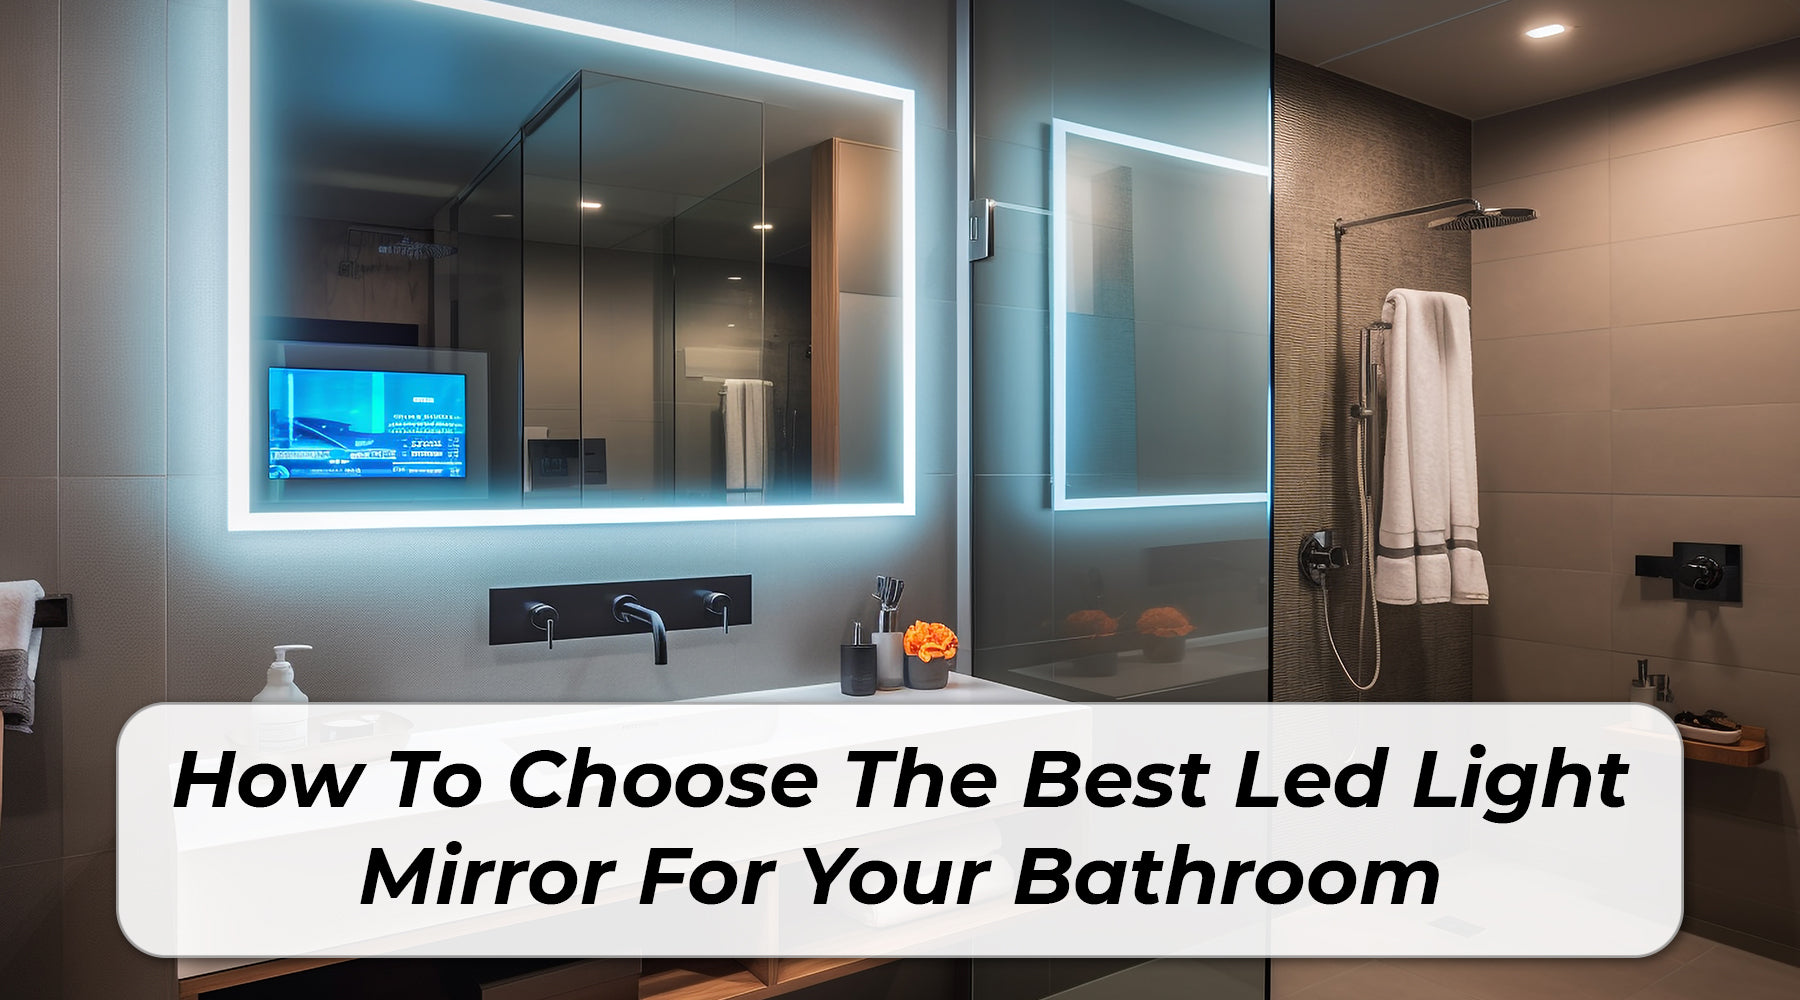 How to Choose the Best LED Light Mirror for Your Bathroom